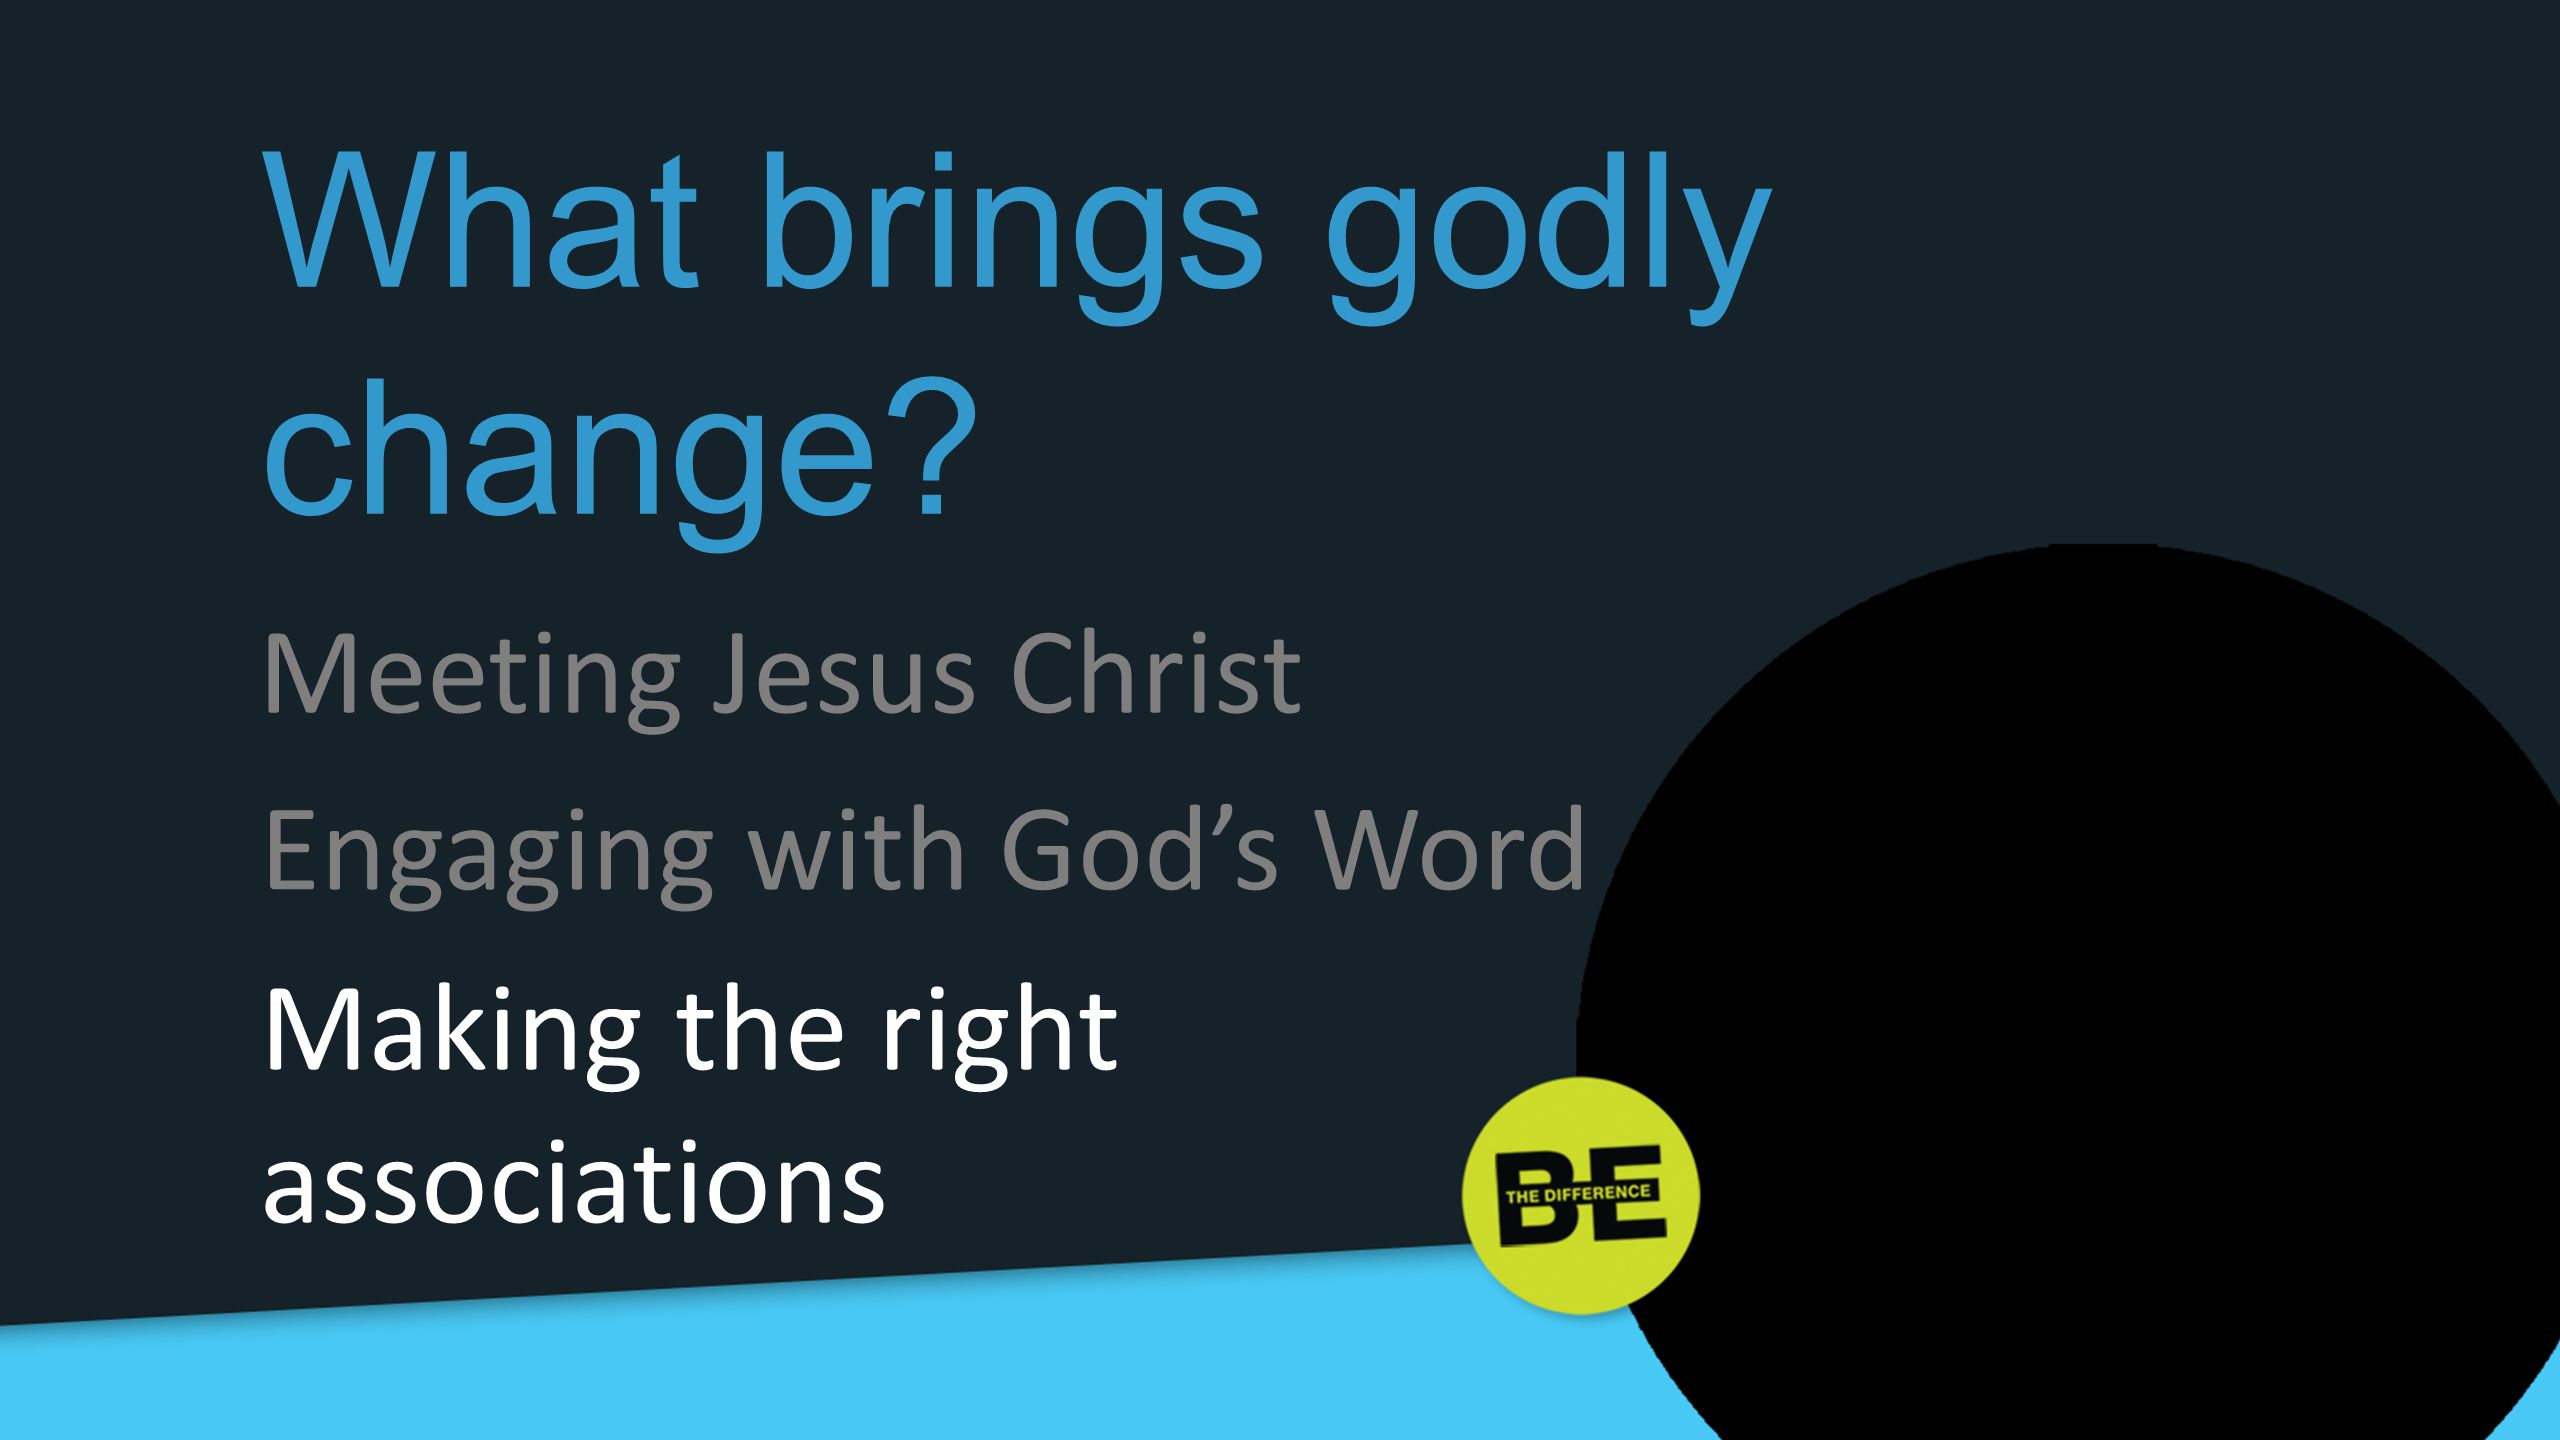 What brings godly change